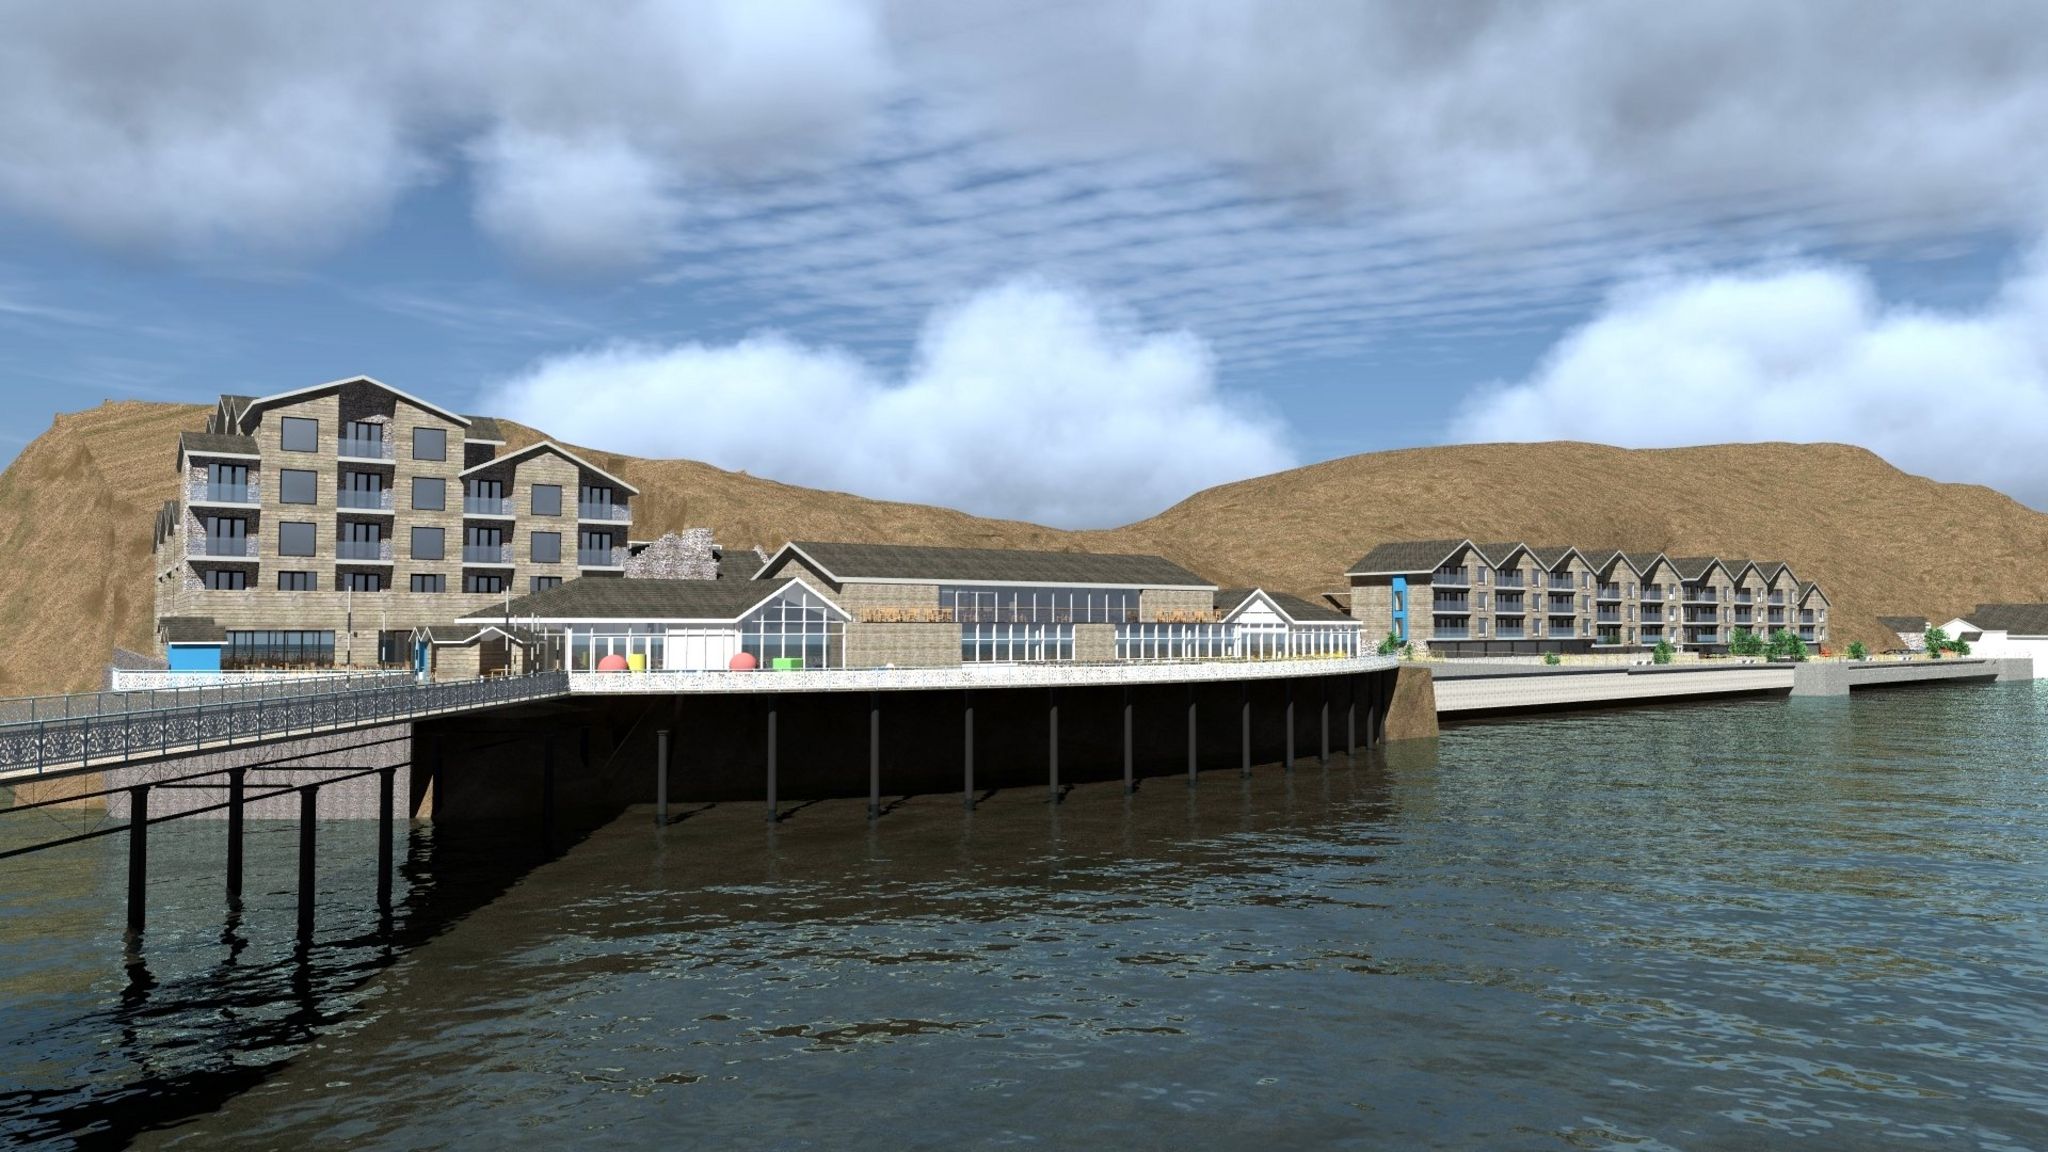 Artist impression of proposed Mumbles Pier redevelopment